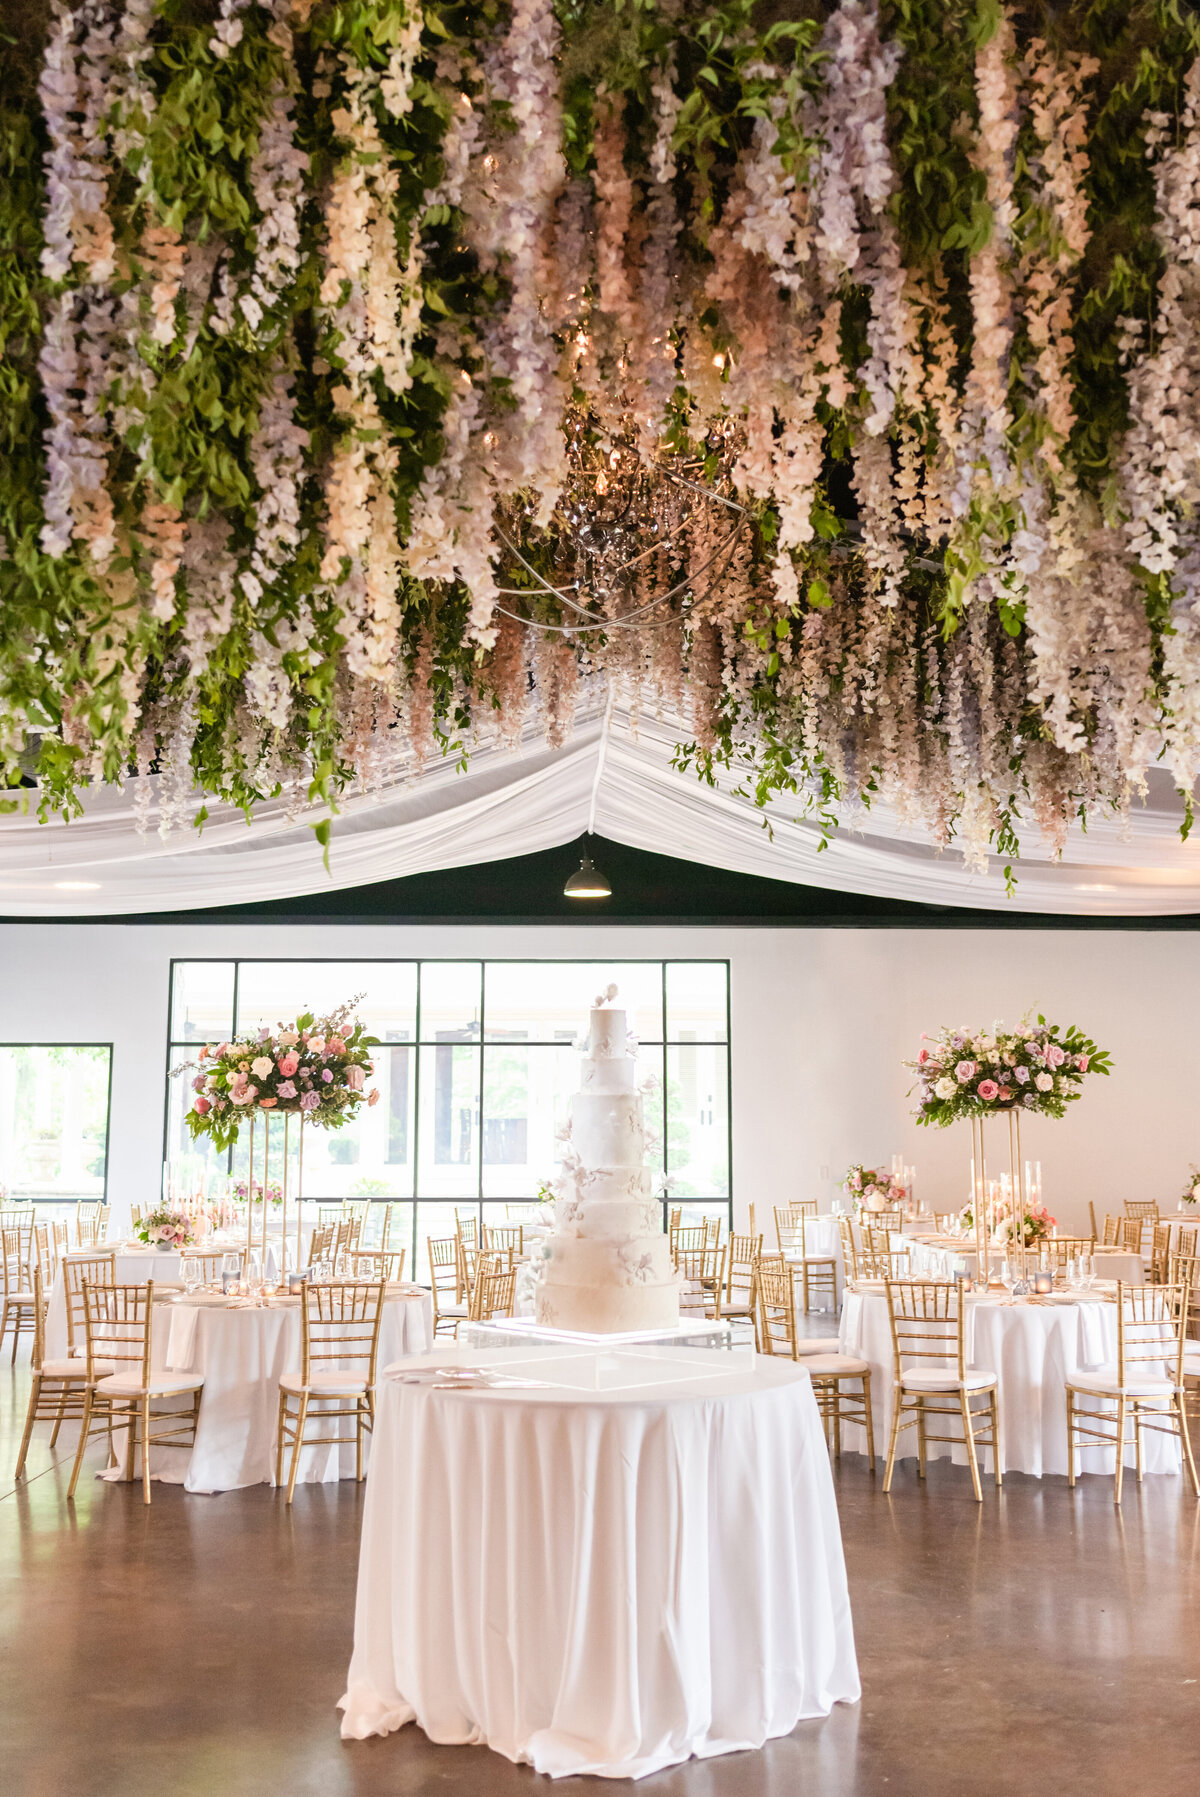 Extravagant wisteria floral installation covers the dance floor at in hues of lavender, cream, dusty pink, and natural greenery. Design by Rosemary and Finch in Nashville, TN.